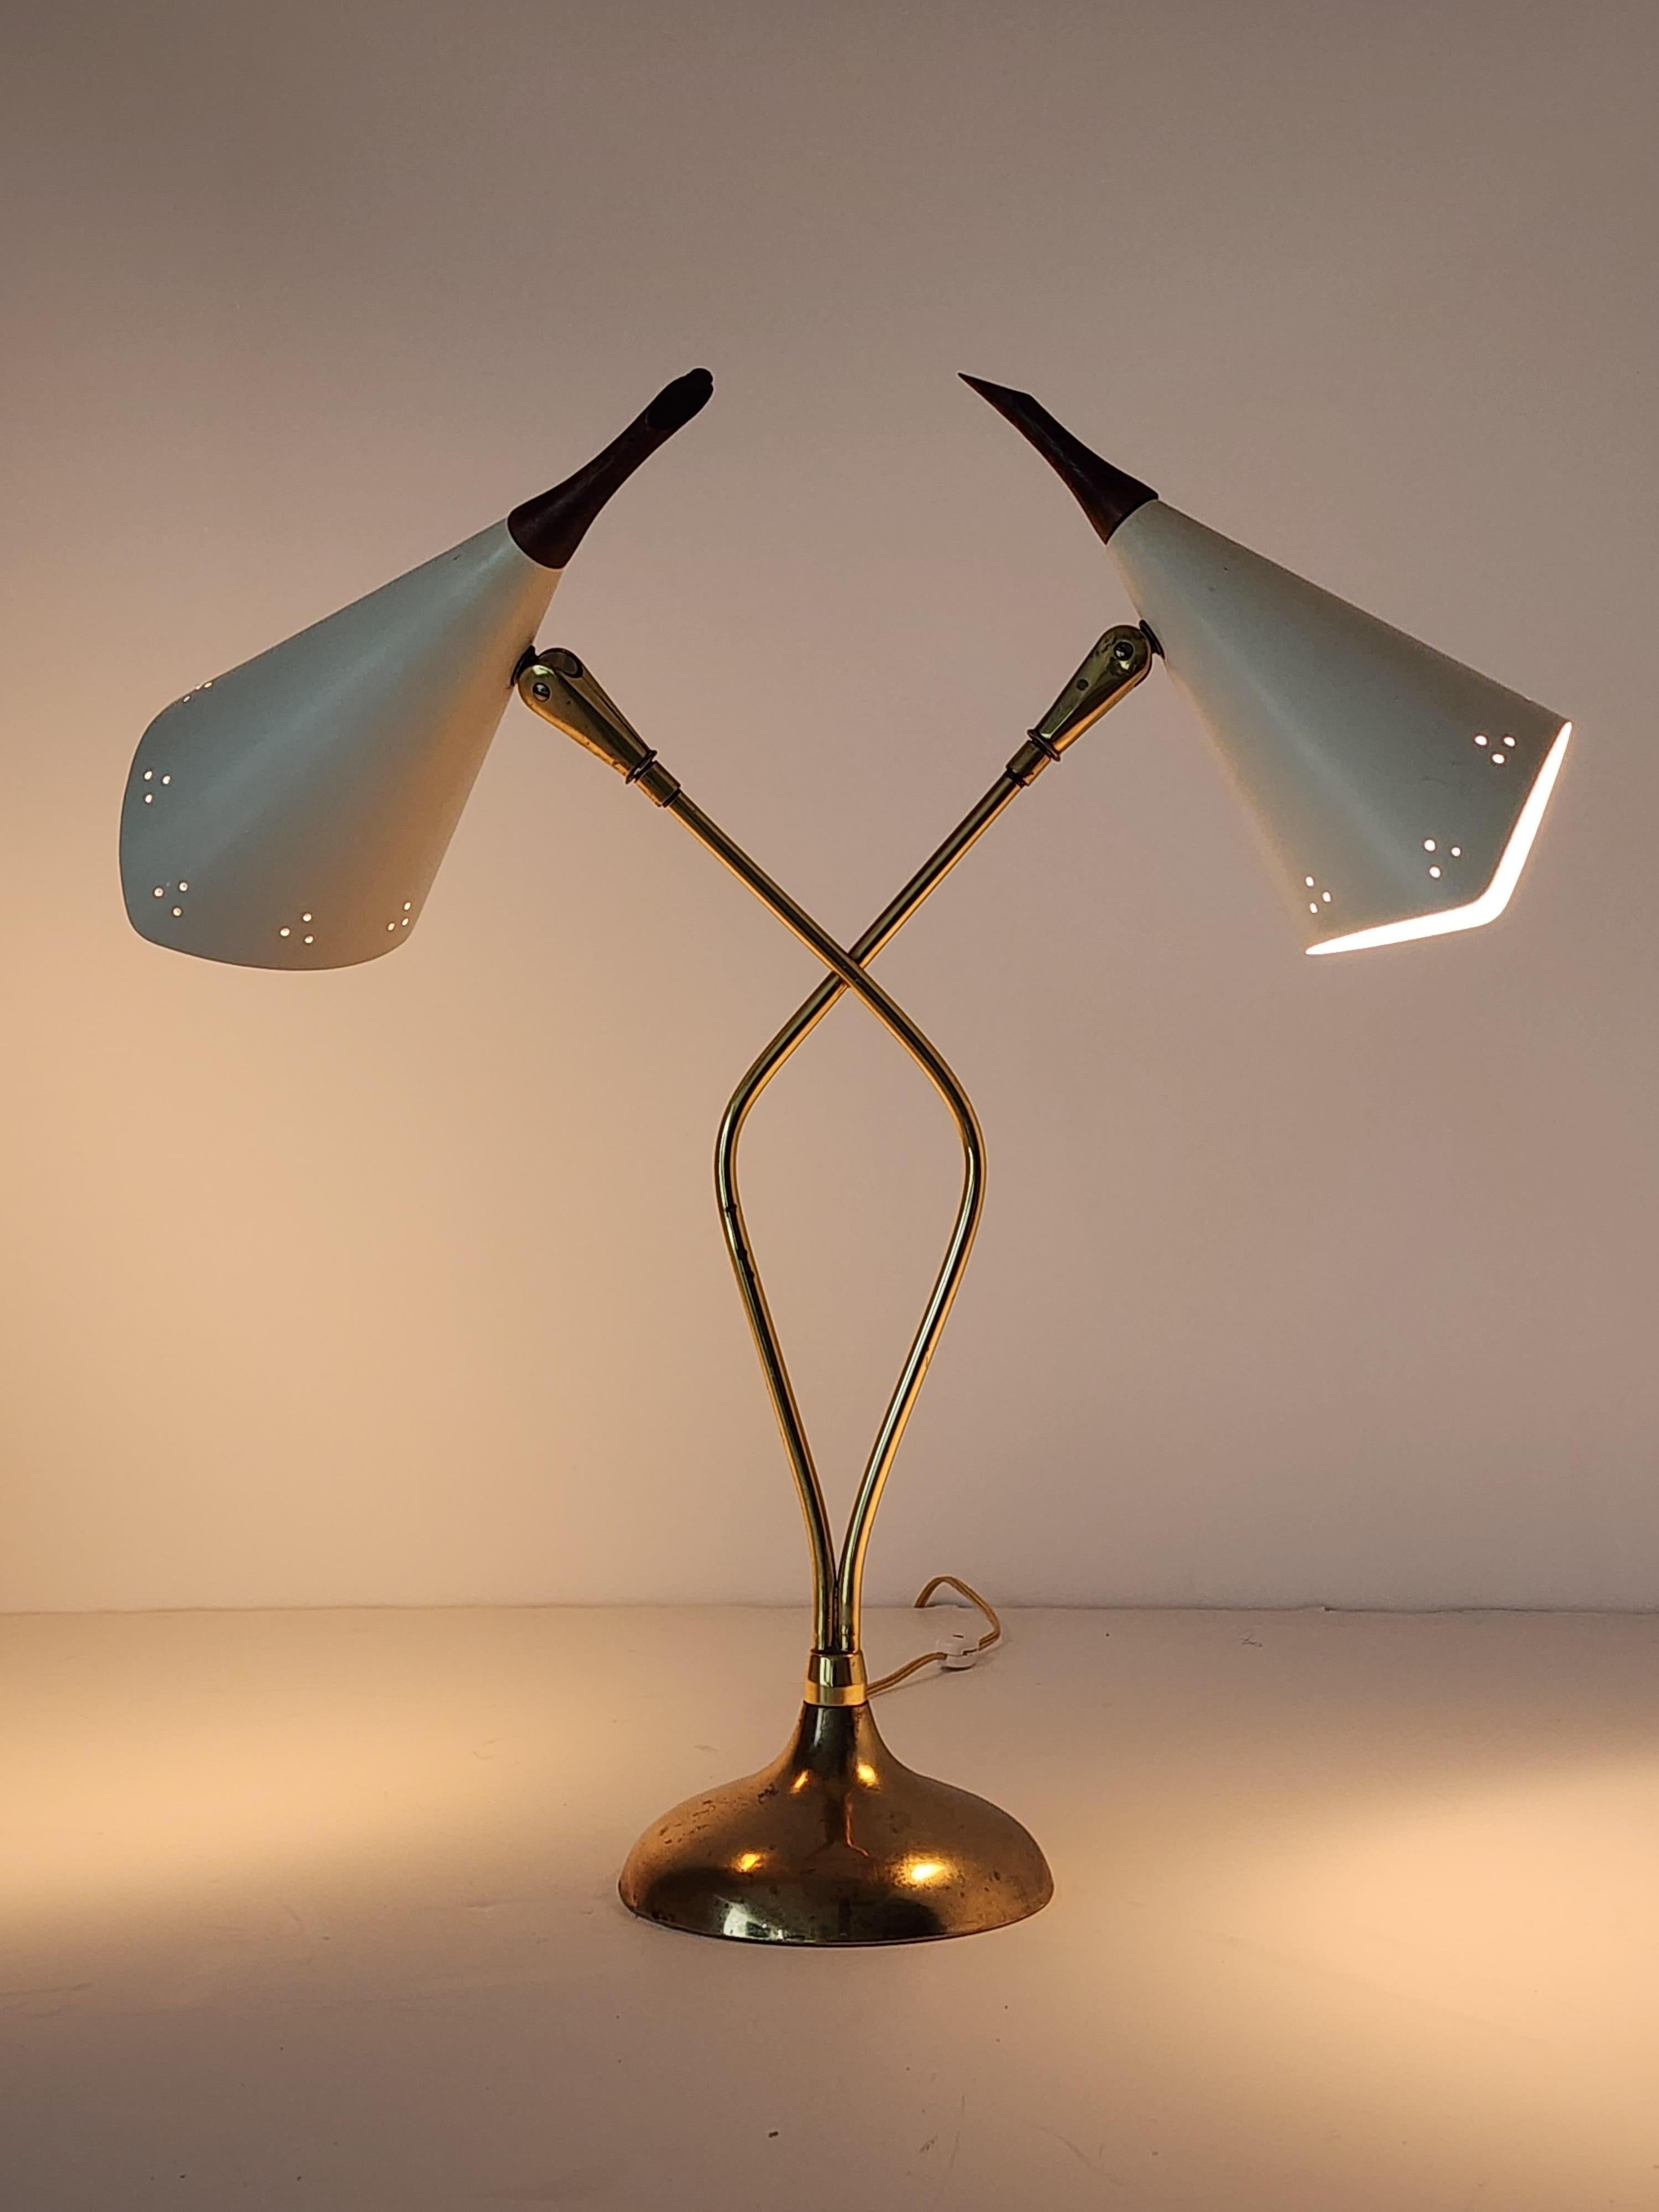 Sensuous shaped table lamp from Laurel Mfg. USA .  1950s

Pierced , enameled shade sitting on a tall  brass structure . 

The walnut tip end serve as an On/Off switch 

Contain 2 E27  Edison  socket  rated at 60 watt . 